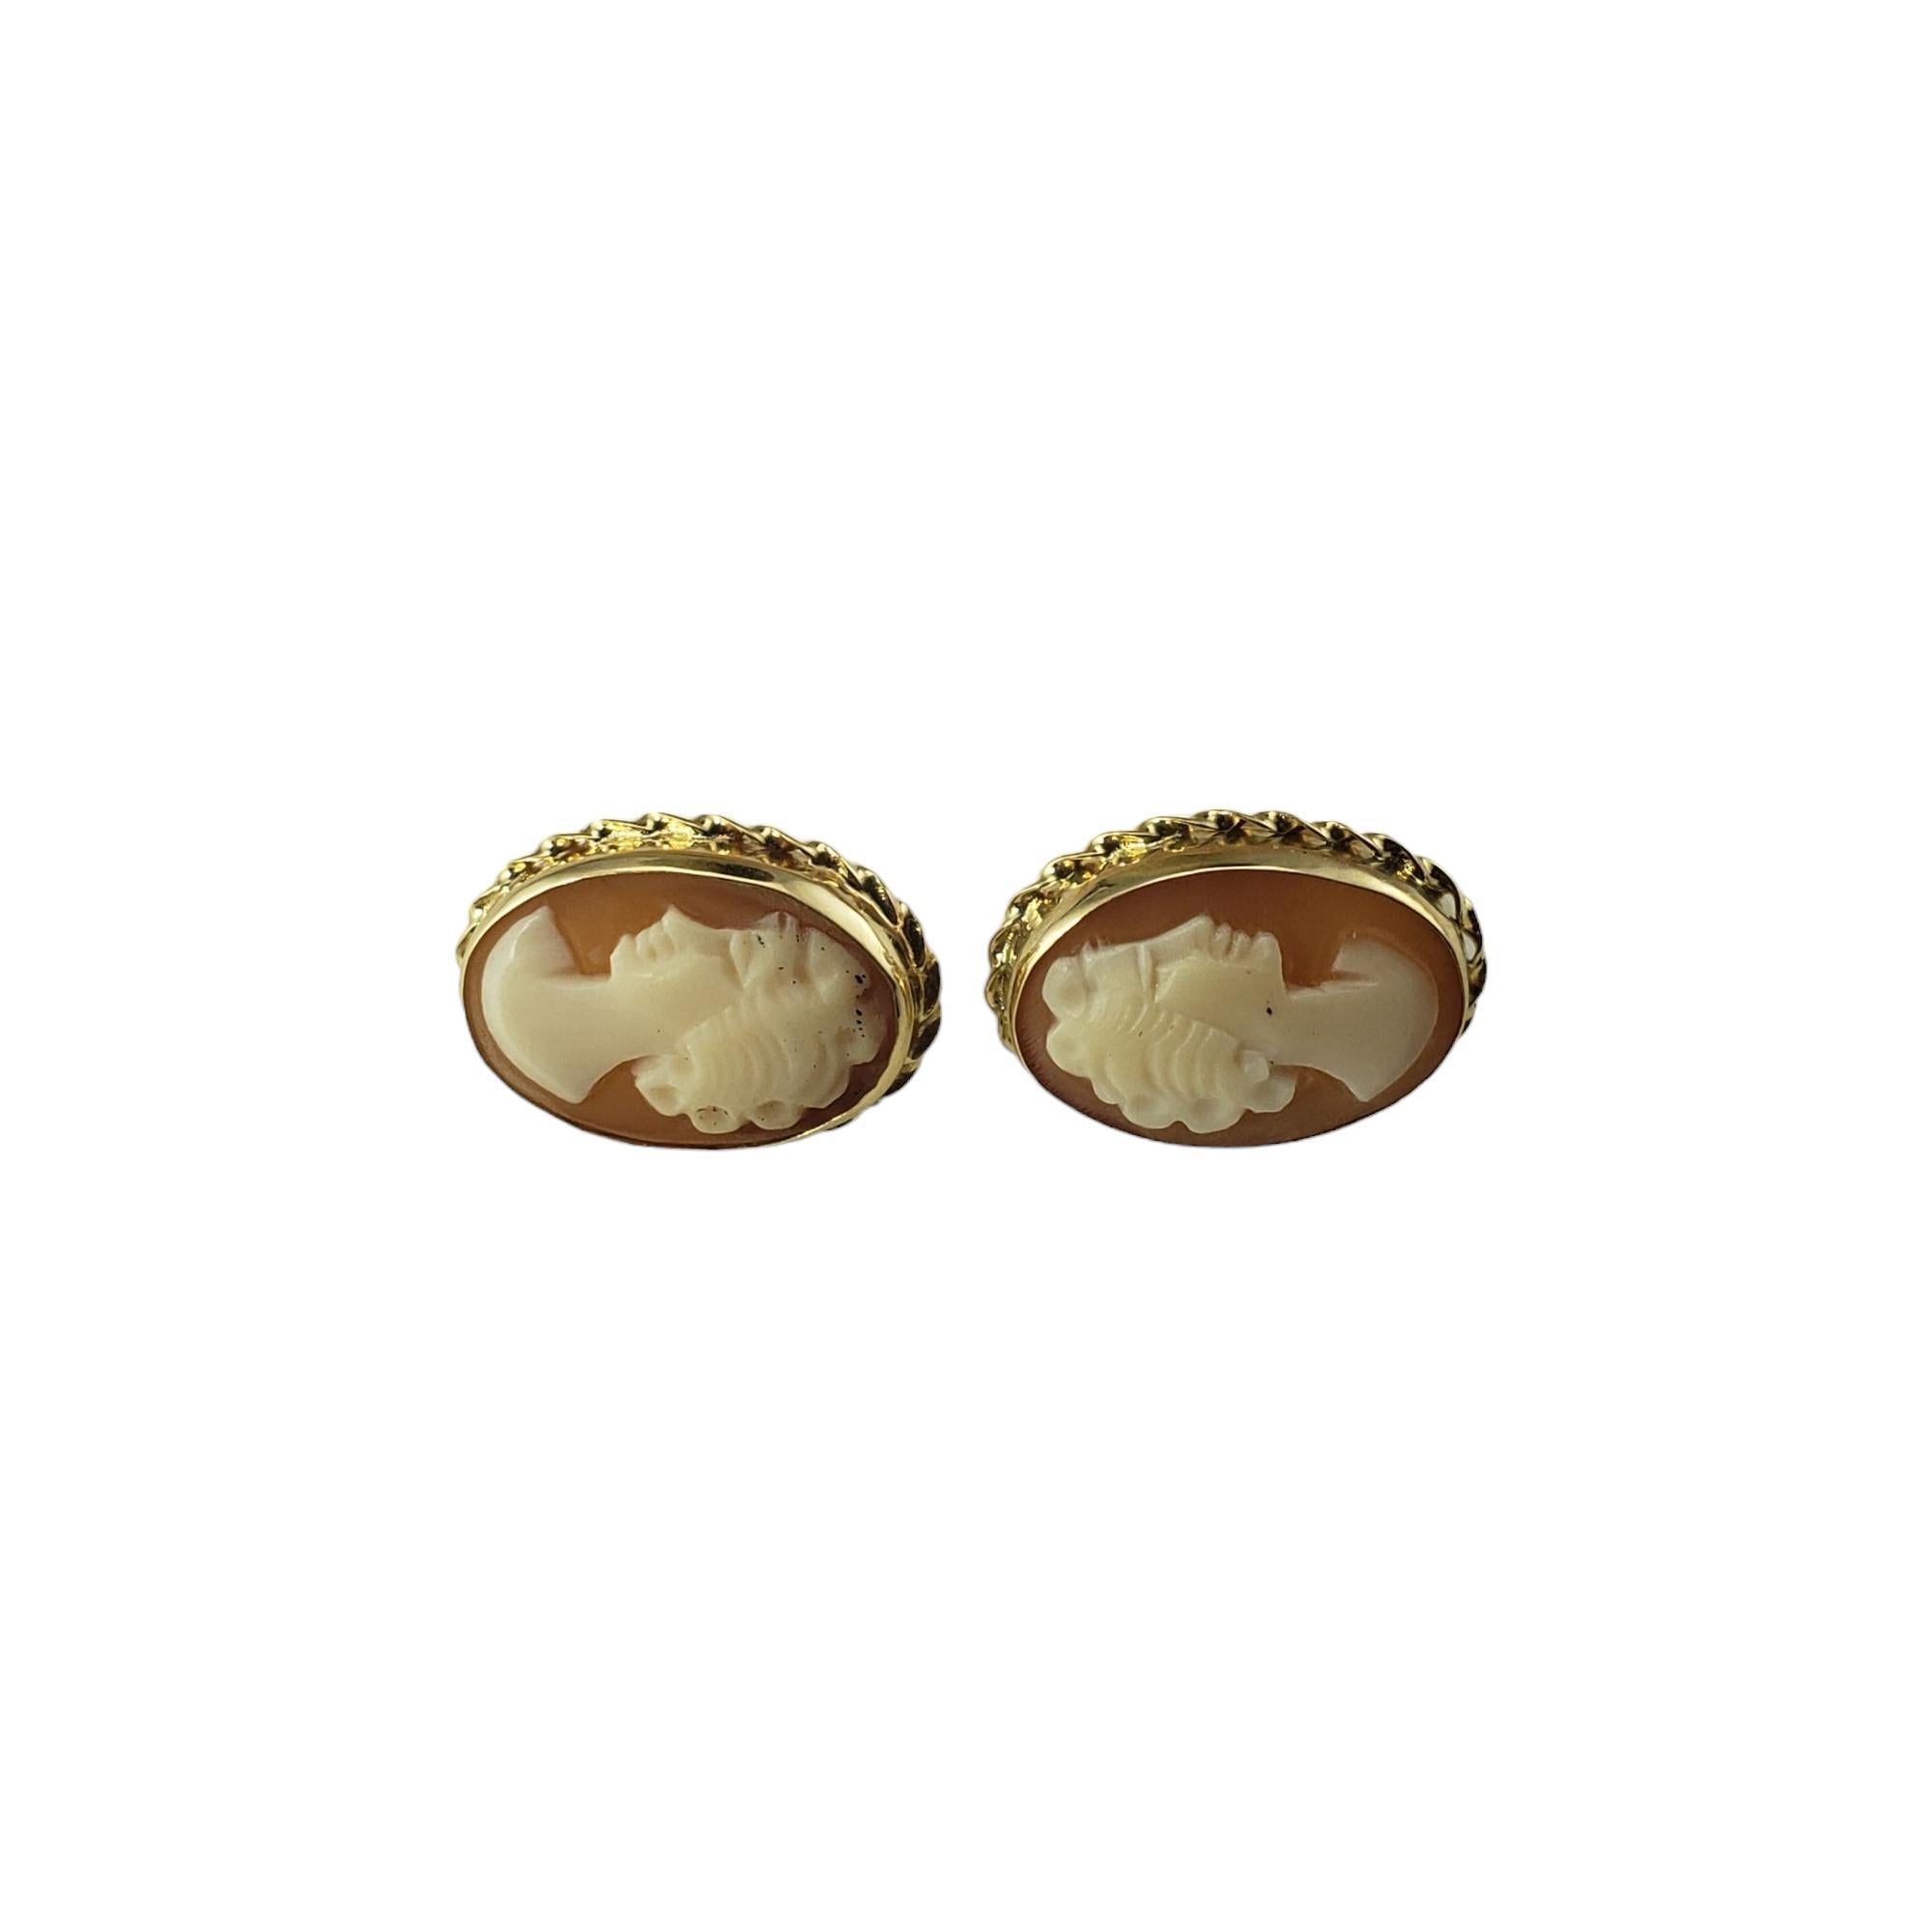 Vintage 14 Karat Yellow Gold Cameo Earrings-

These elegant cameo earrings each feature a lovely lady in profile set in classic 14K yellow gold.  Push back closures.

Size: 17 mm x 1.5 mm

Tested 14K gold.

Weight: 2.4 gr./ 15 dwt.

Very good